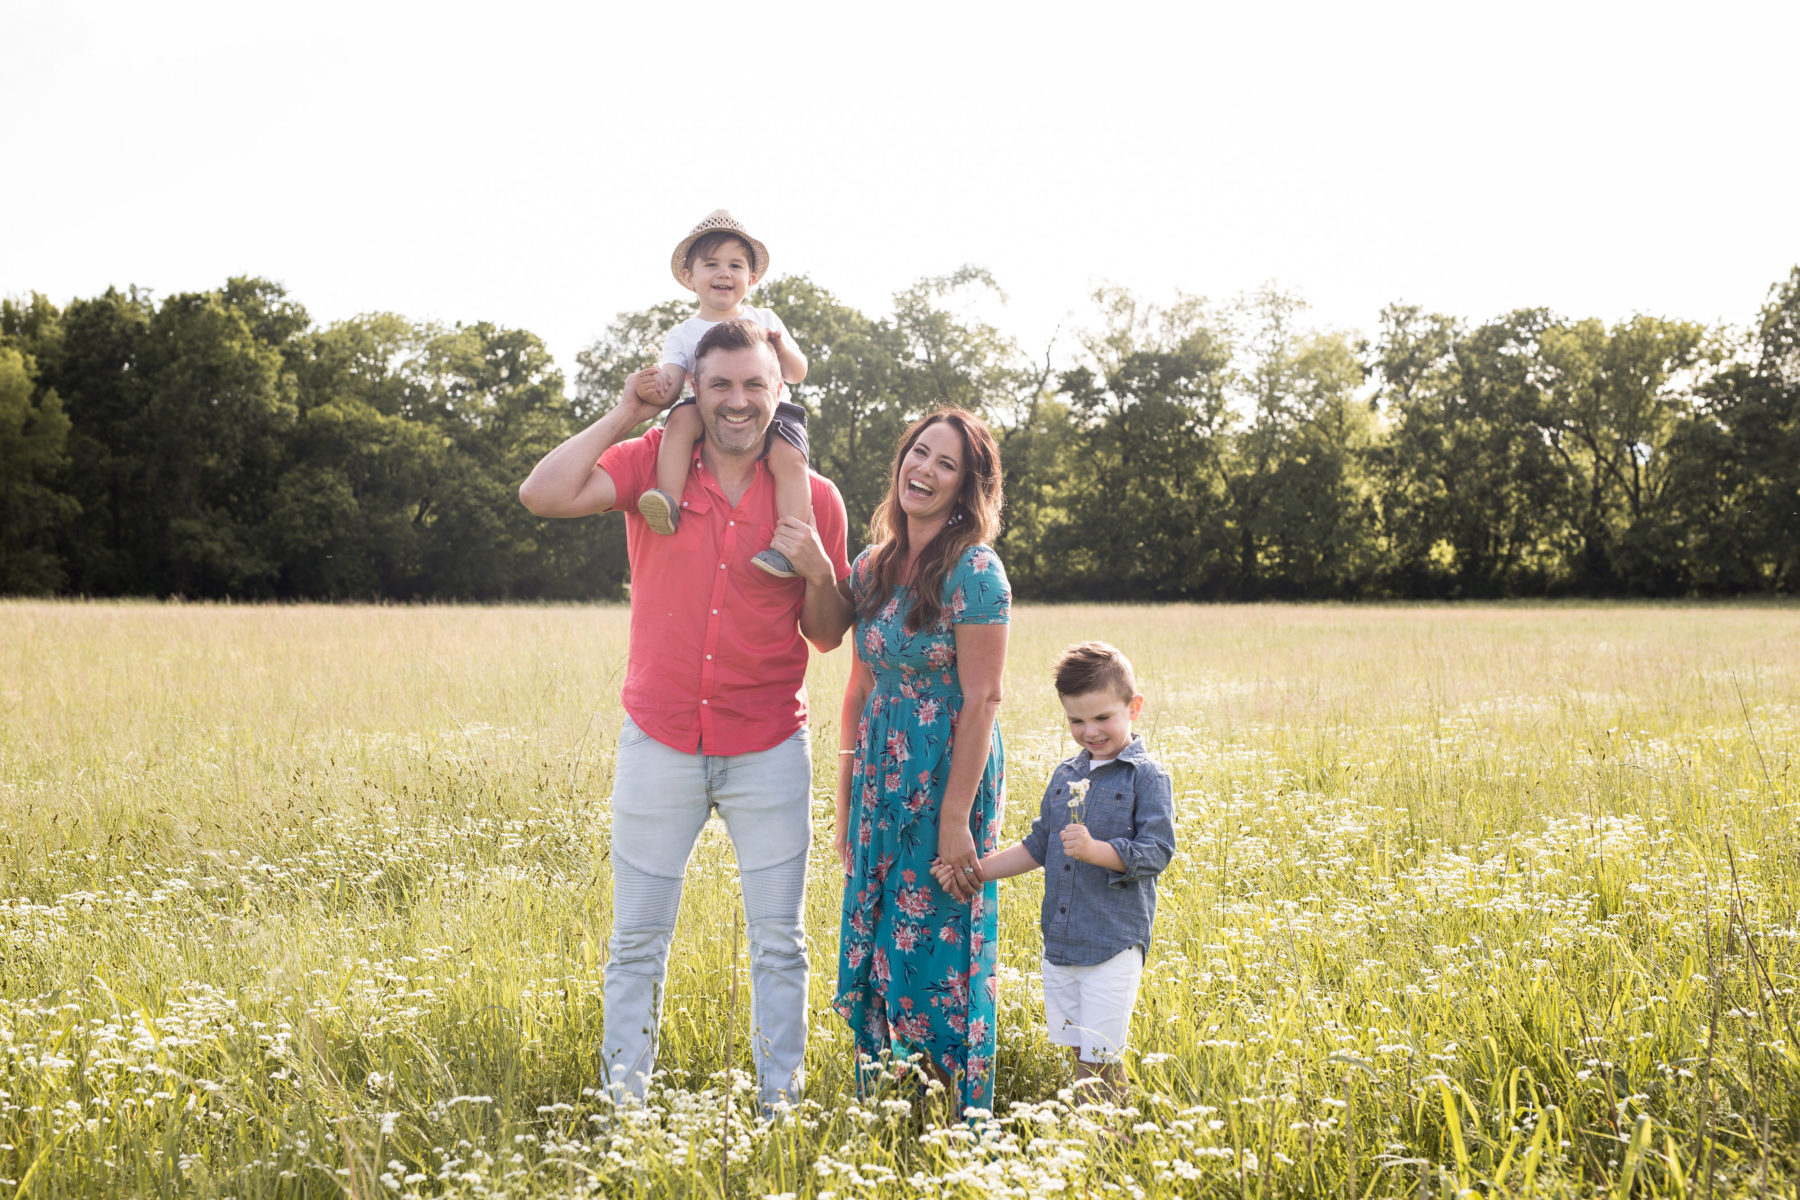 Mini Family Photo Session by Becka Edmonson Photography featured on Nashville Bride Guide!